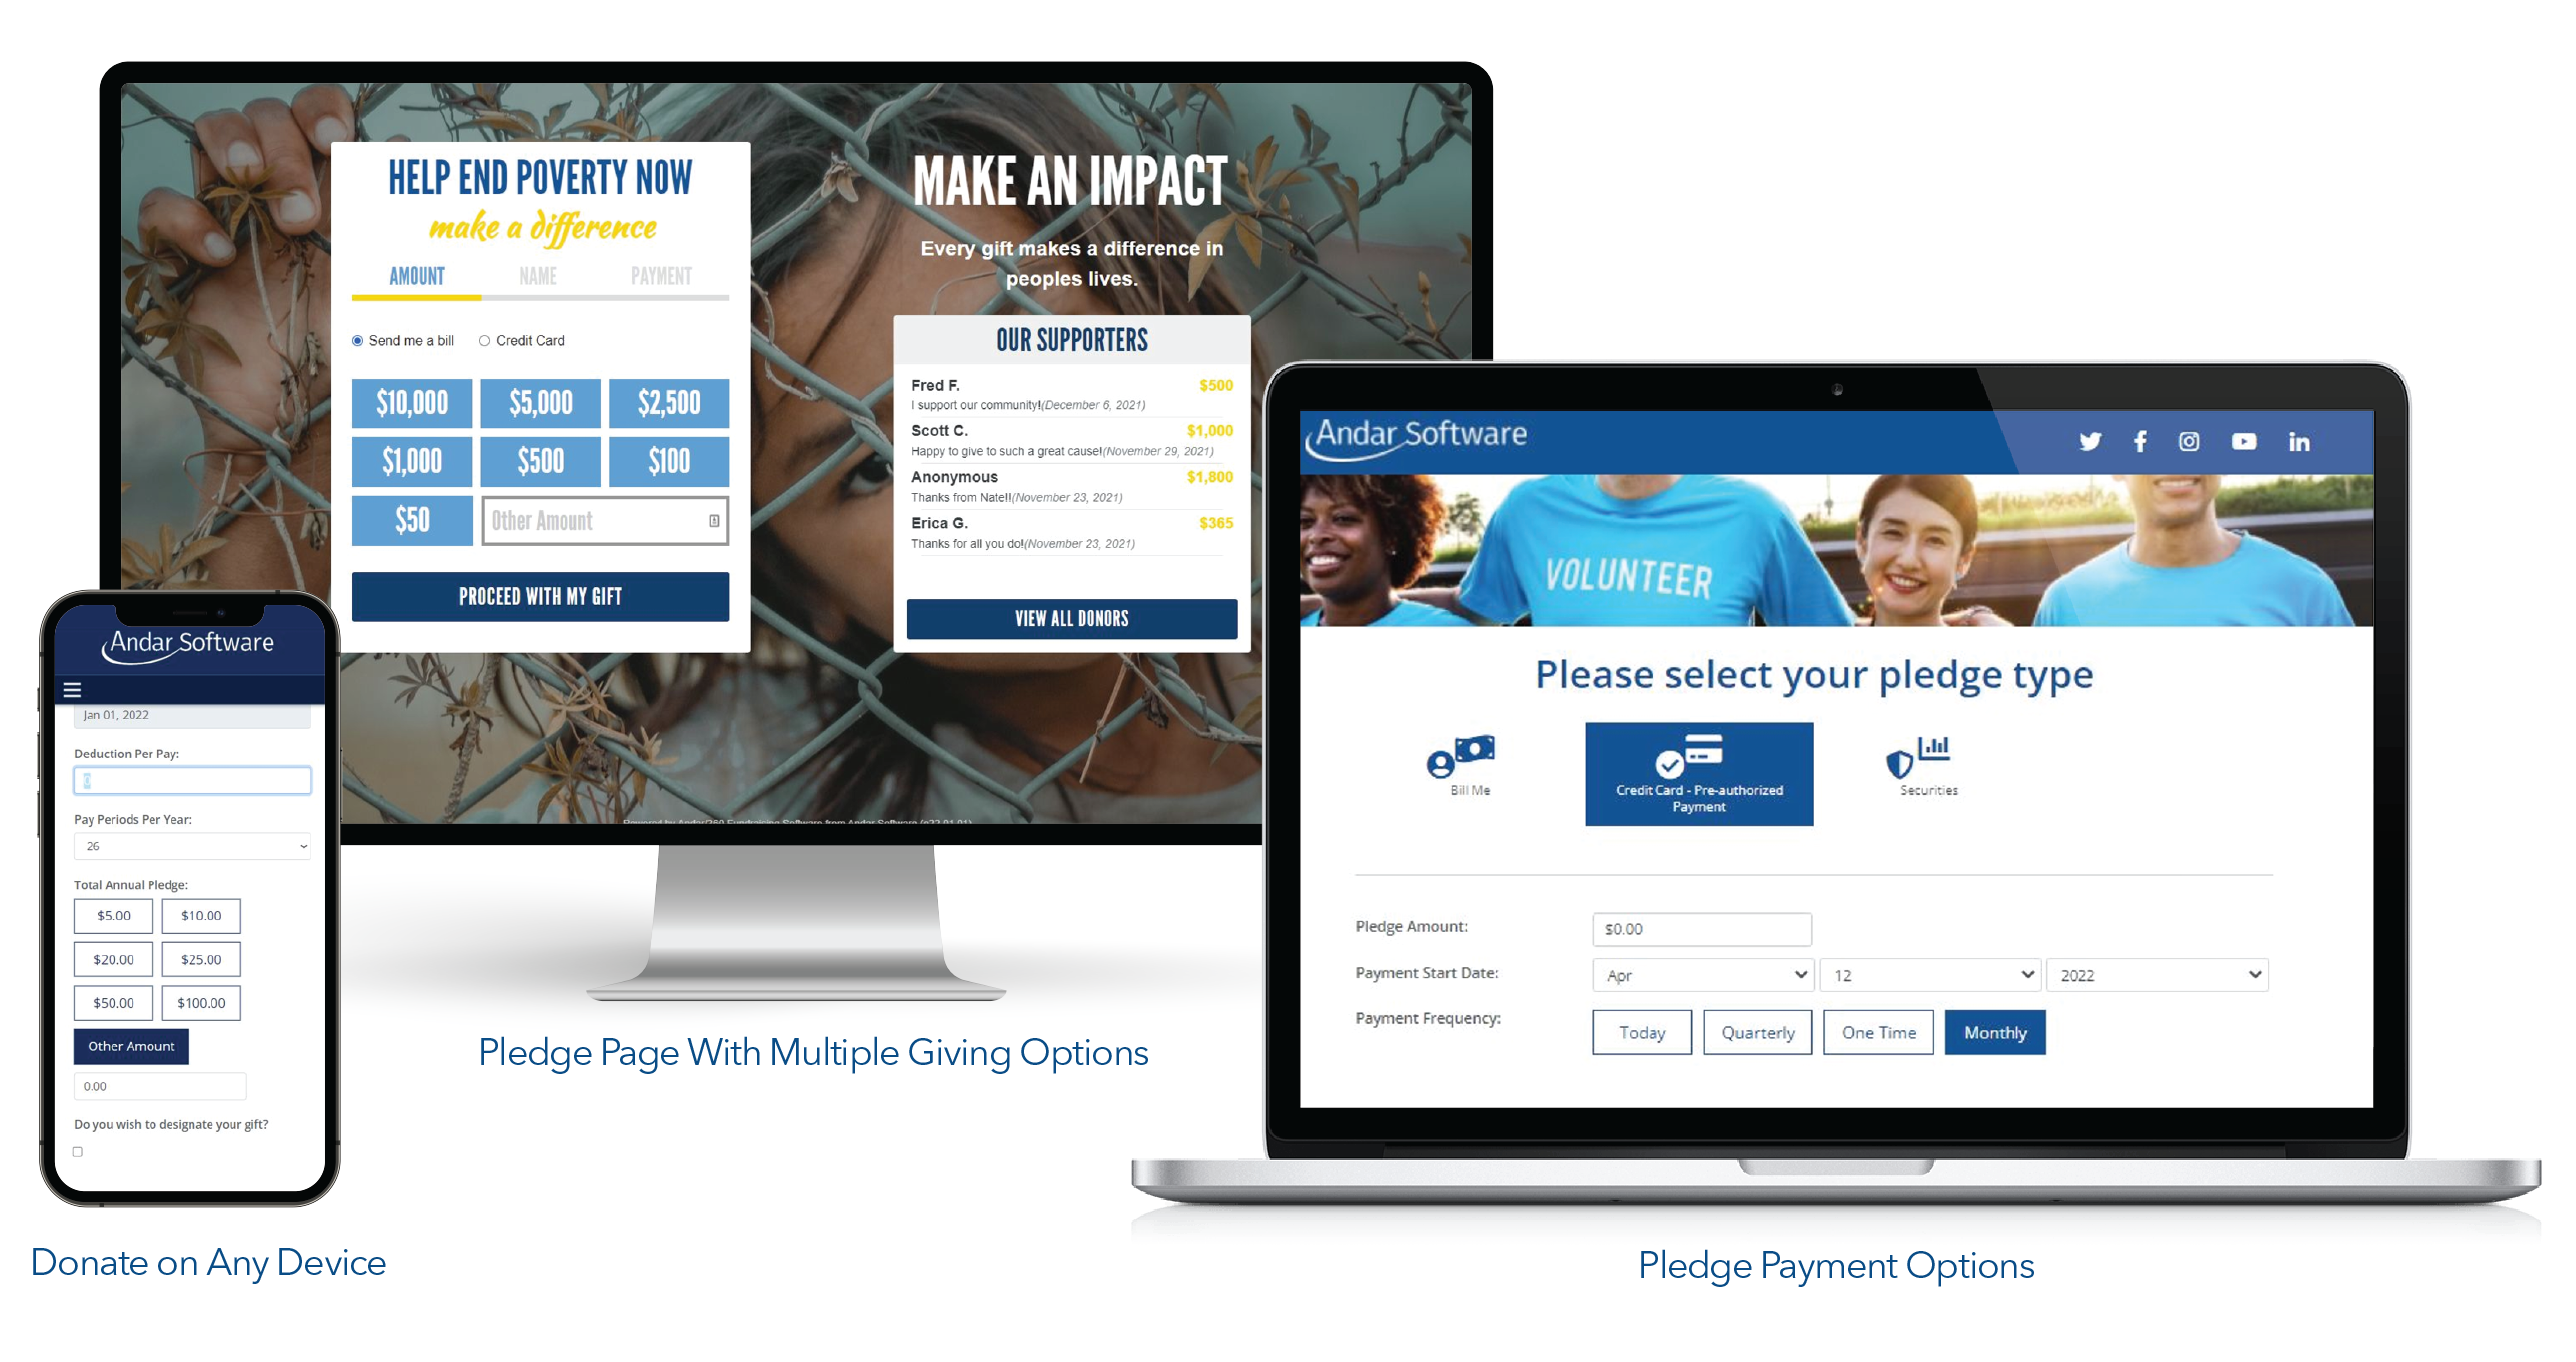 Process donations online for your organization or for corporate giving with e-Pledge. Collect donations on any device. Setup pledge pages with multiple giving options. Collect pledge payments through various credit card processing partners.